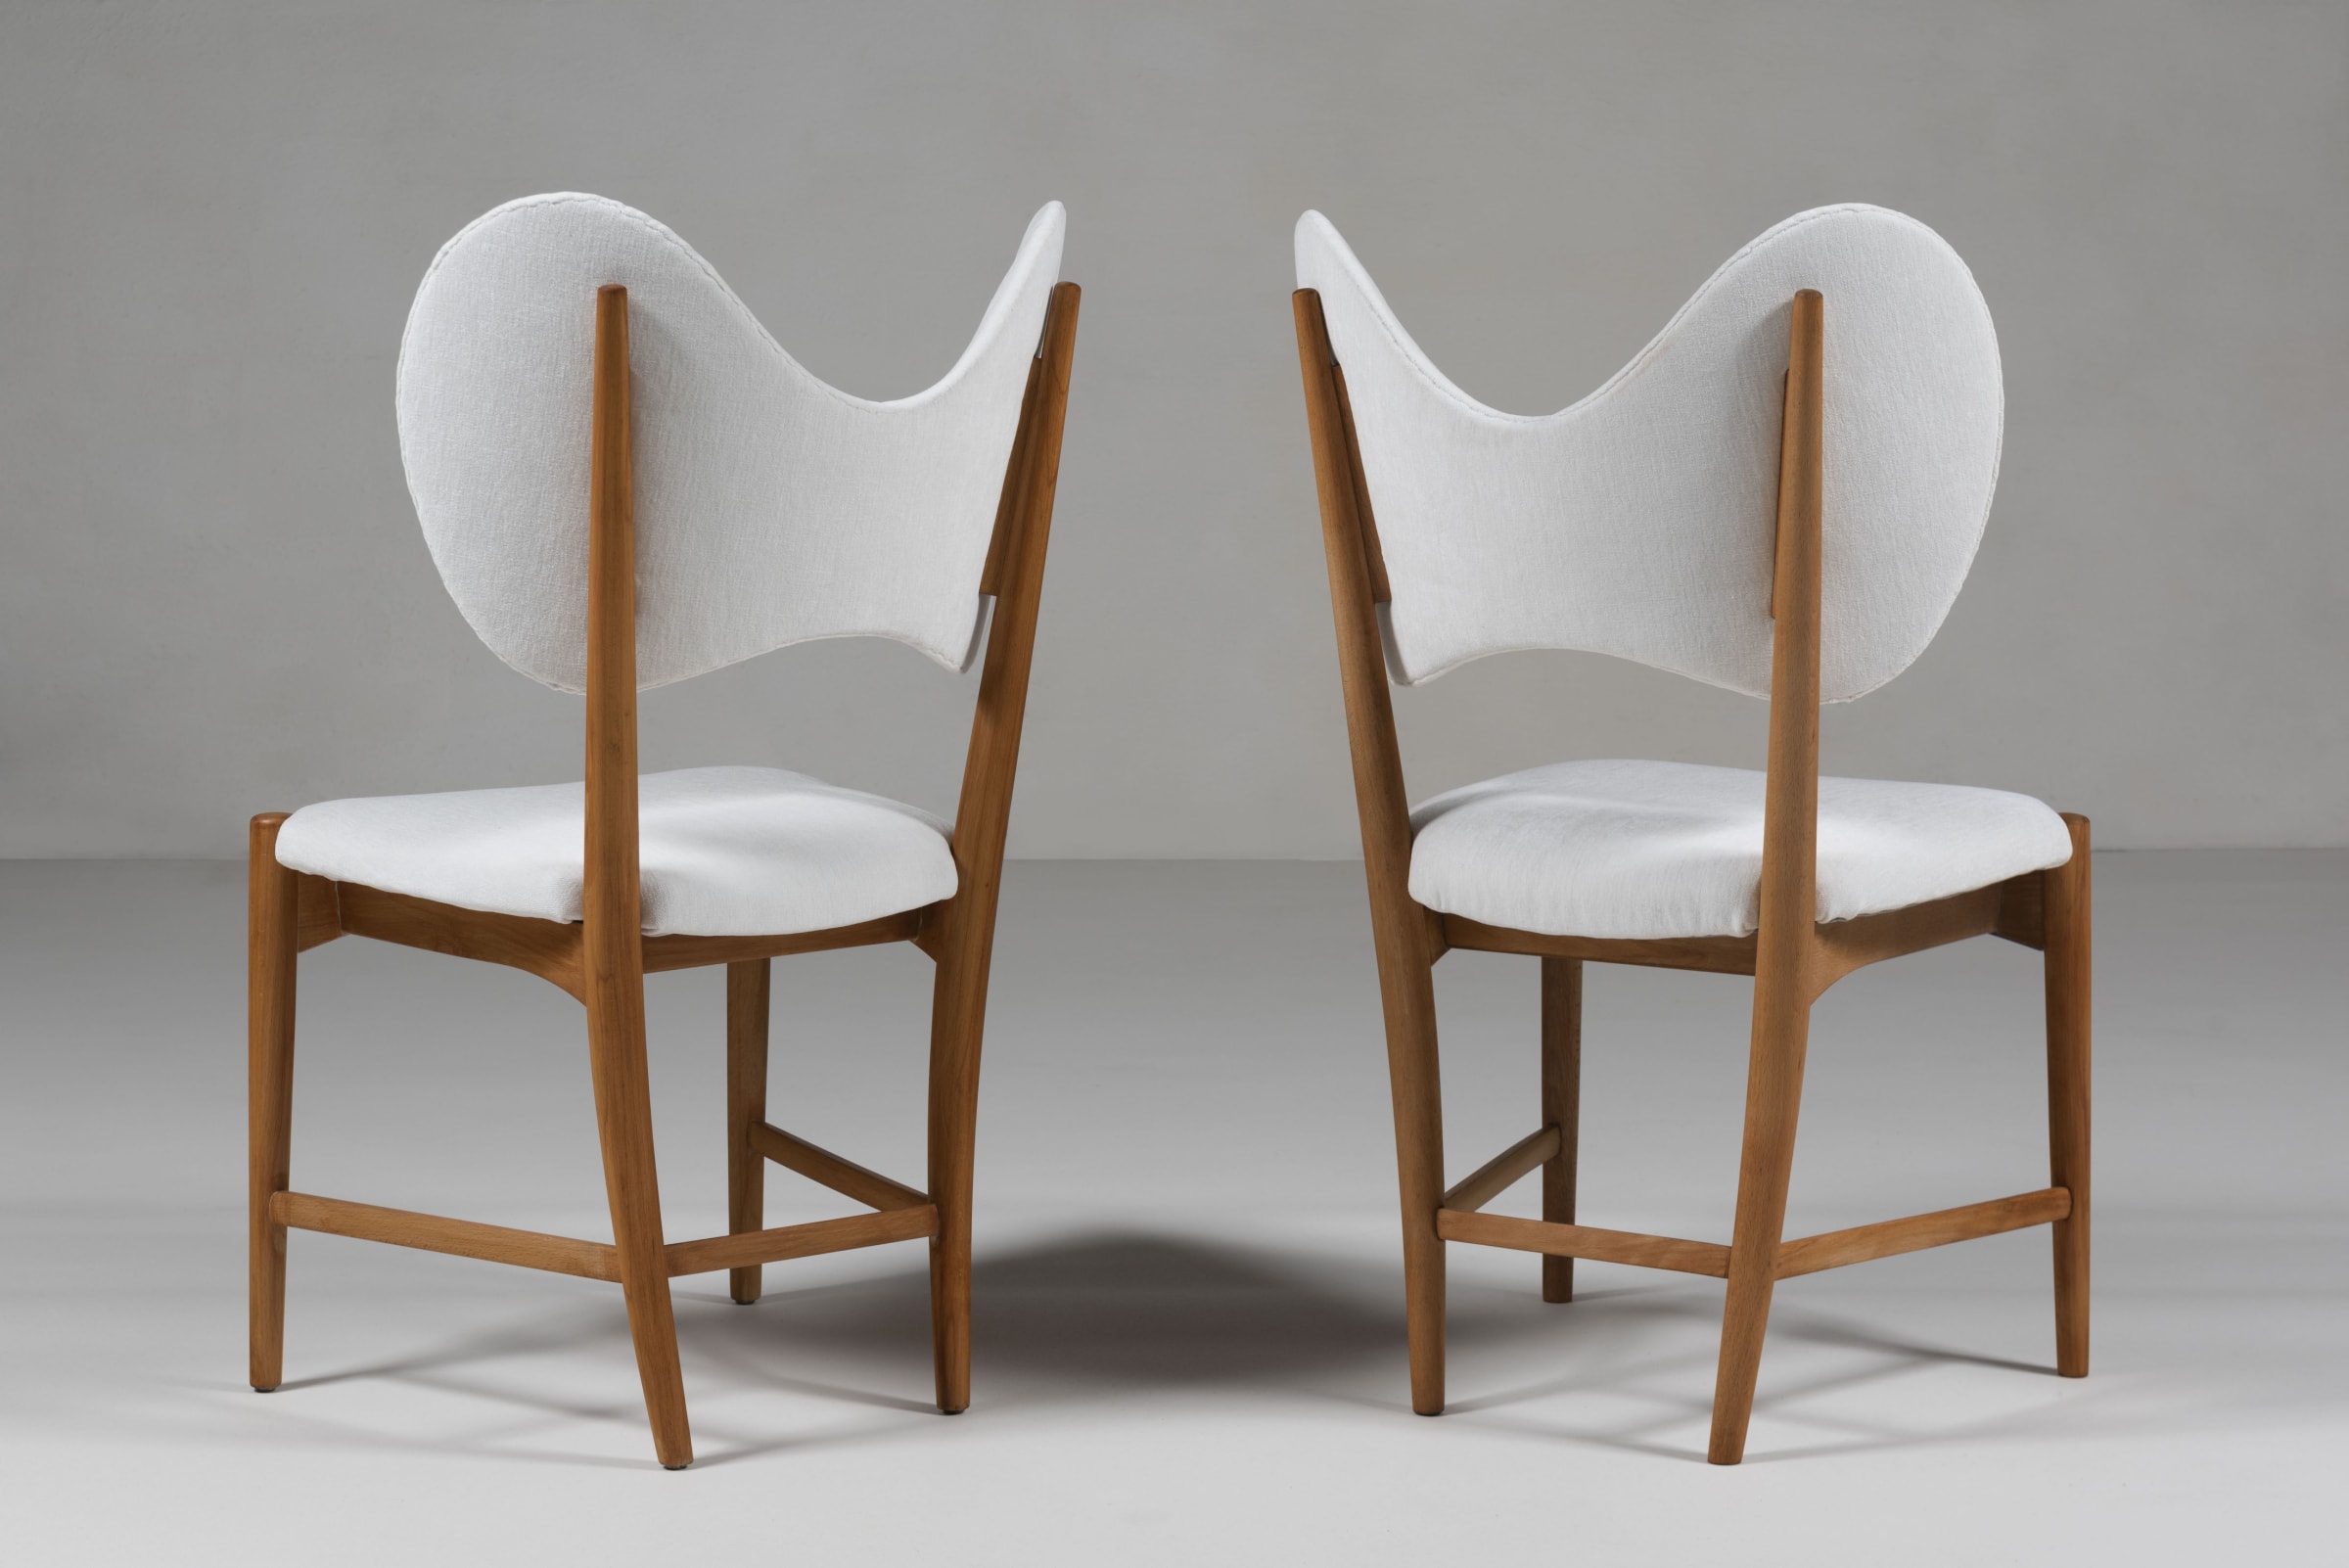 Eva & Nils Koppel, Exceptional set of ten Butterfly chairs, 1950